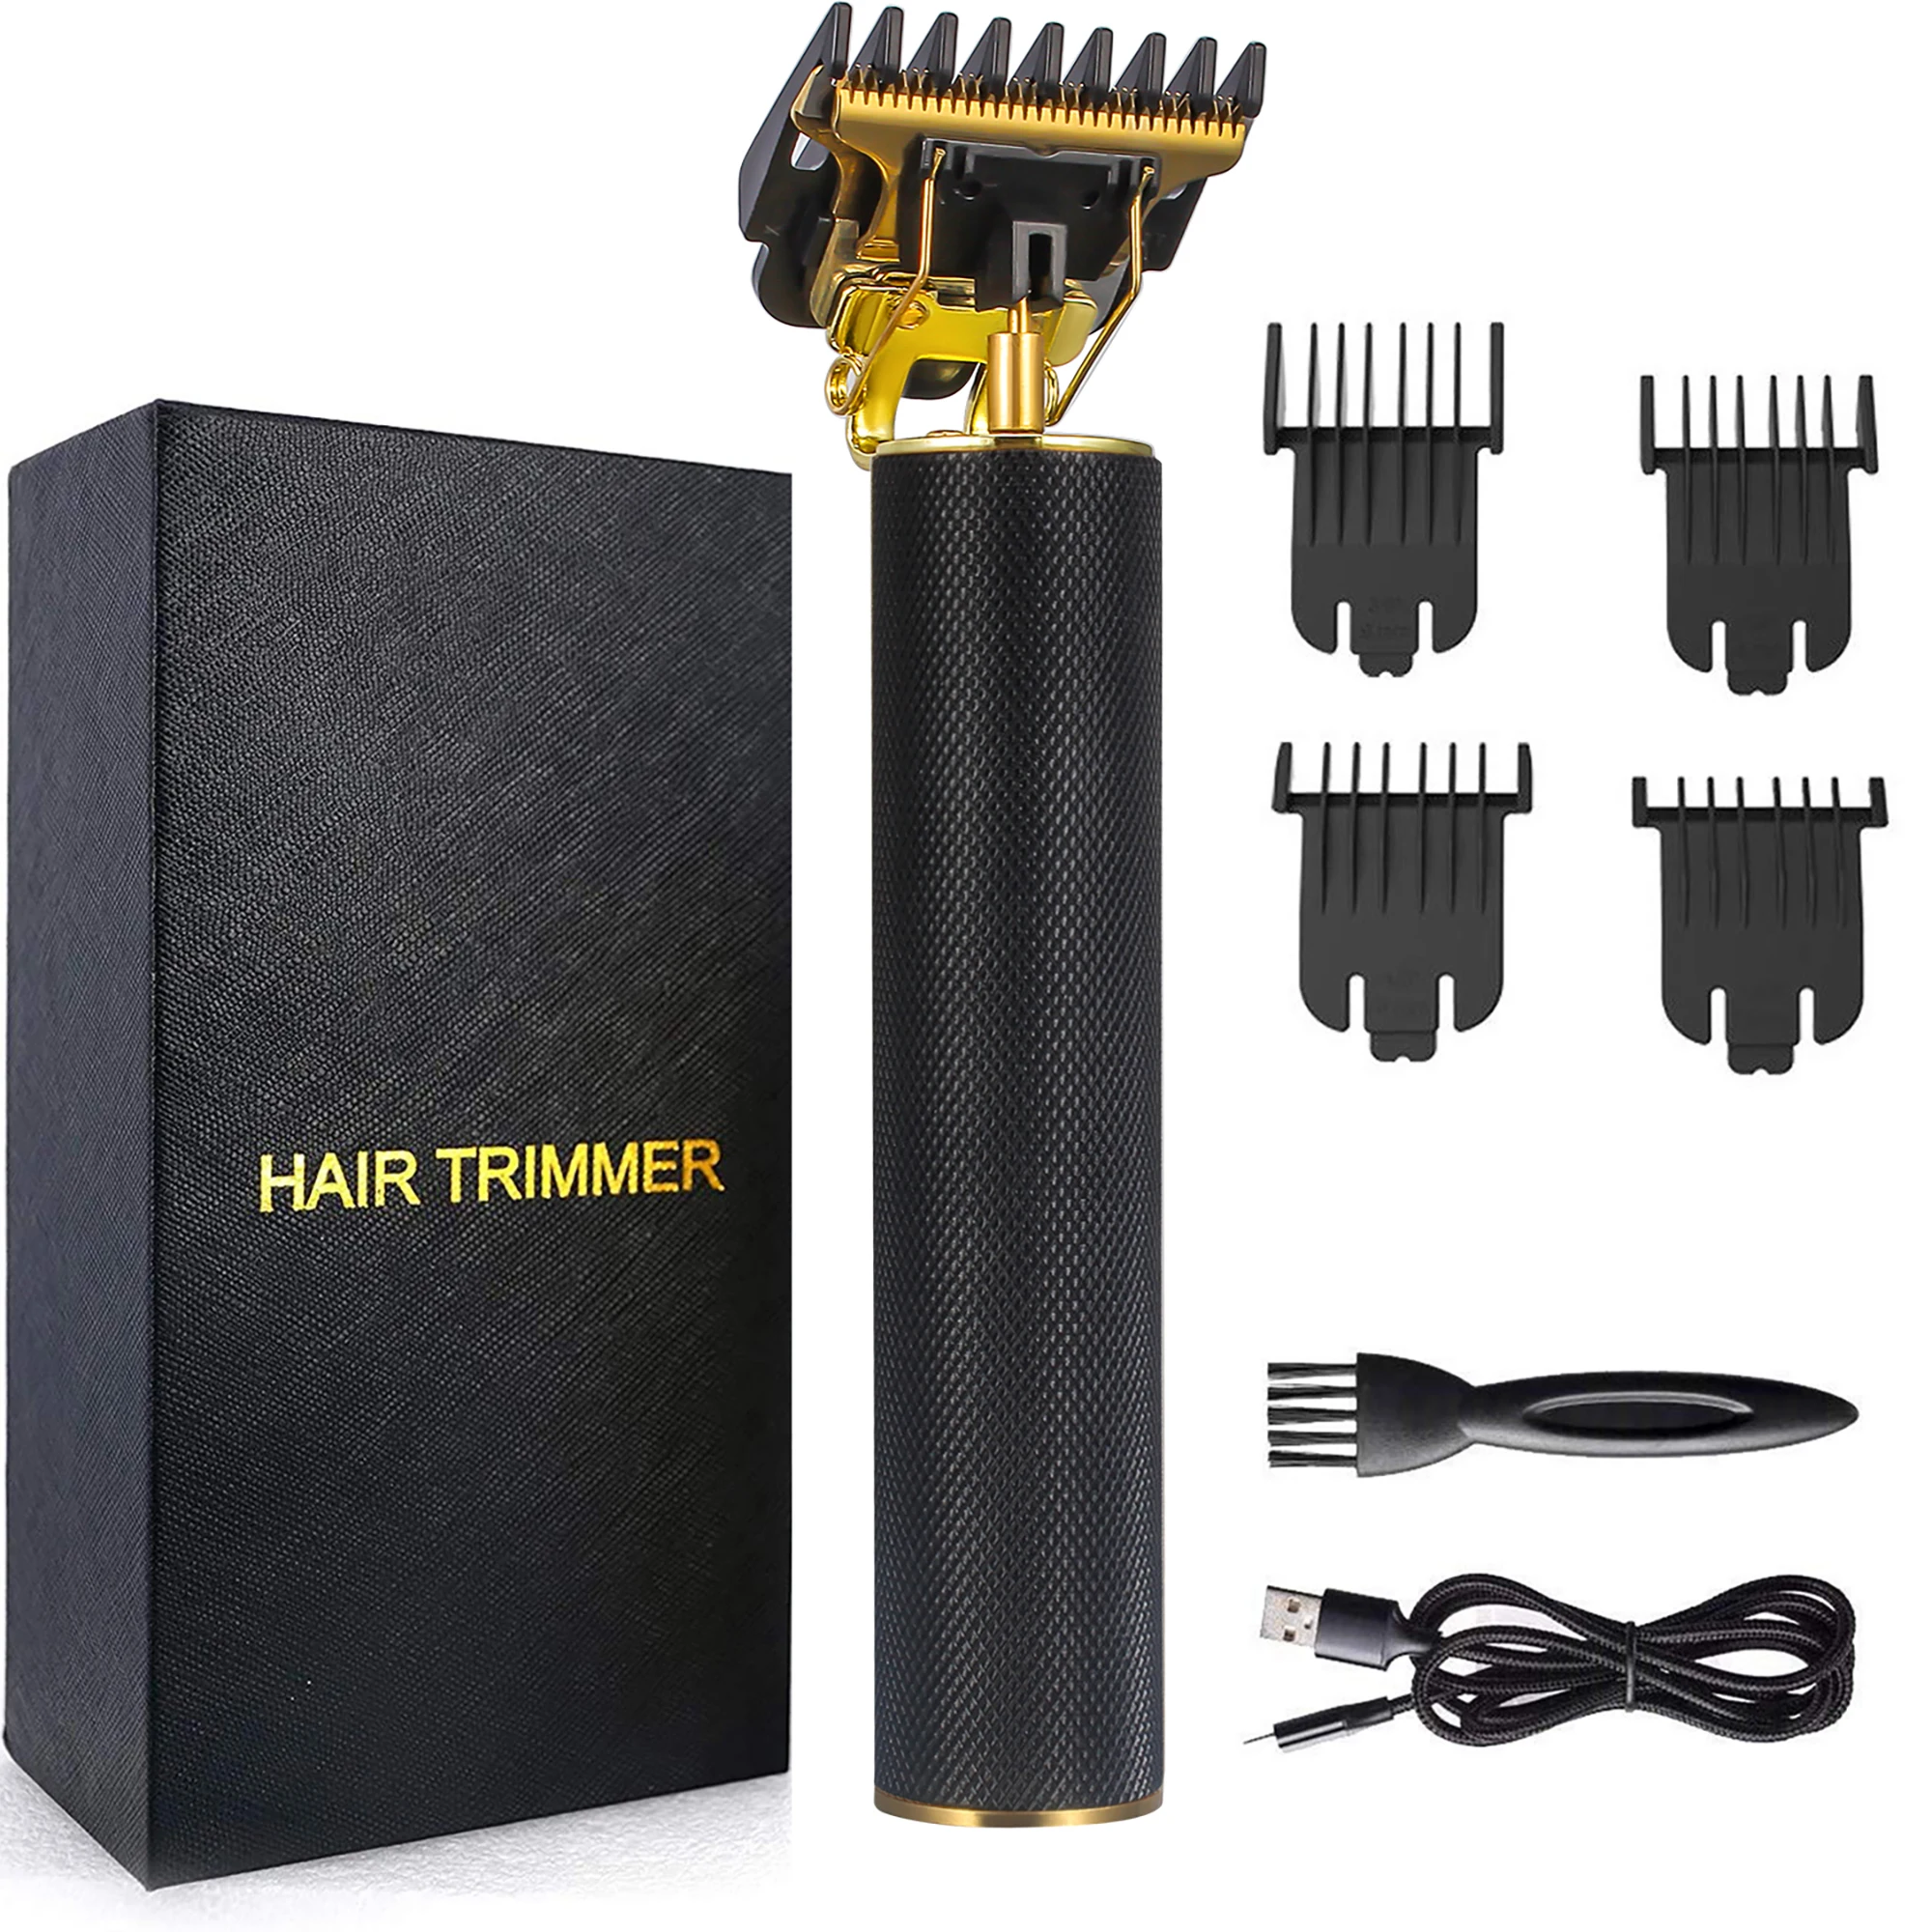 

T-Blade Hair Clippers Barber Electric Shaver Trimmer for Men Has 3 Sideburns Knifes BS0818 Black